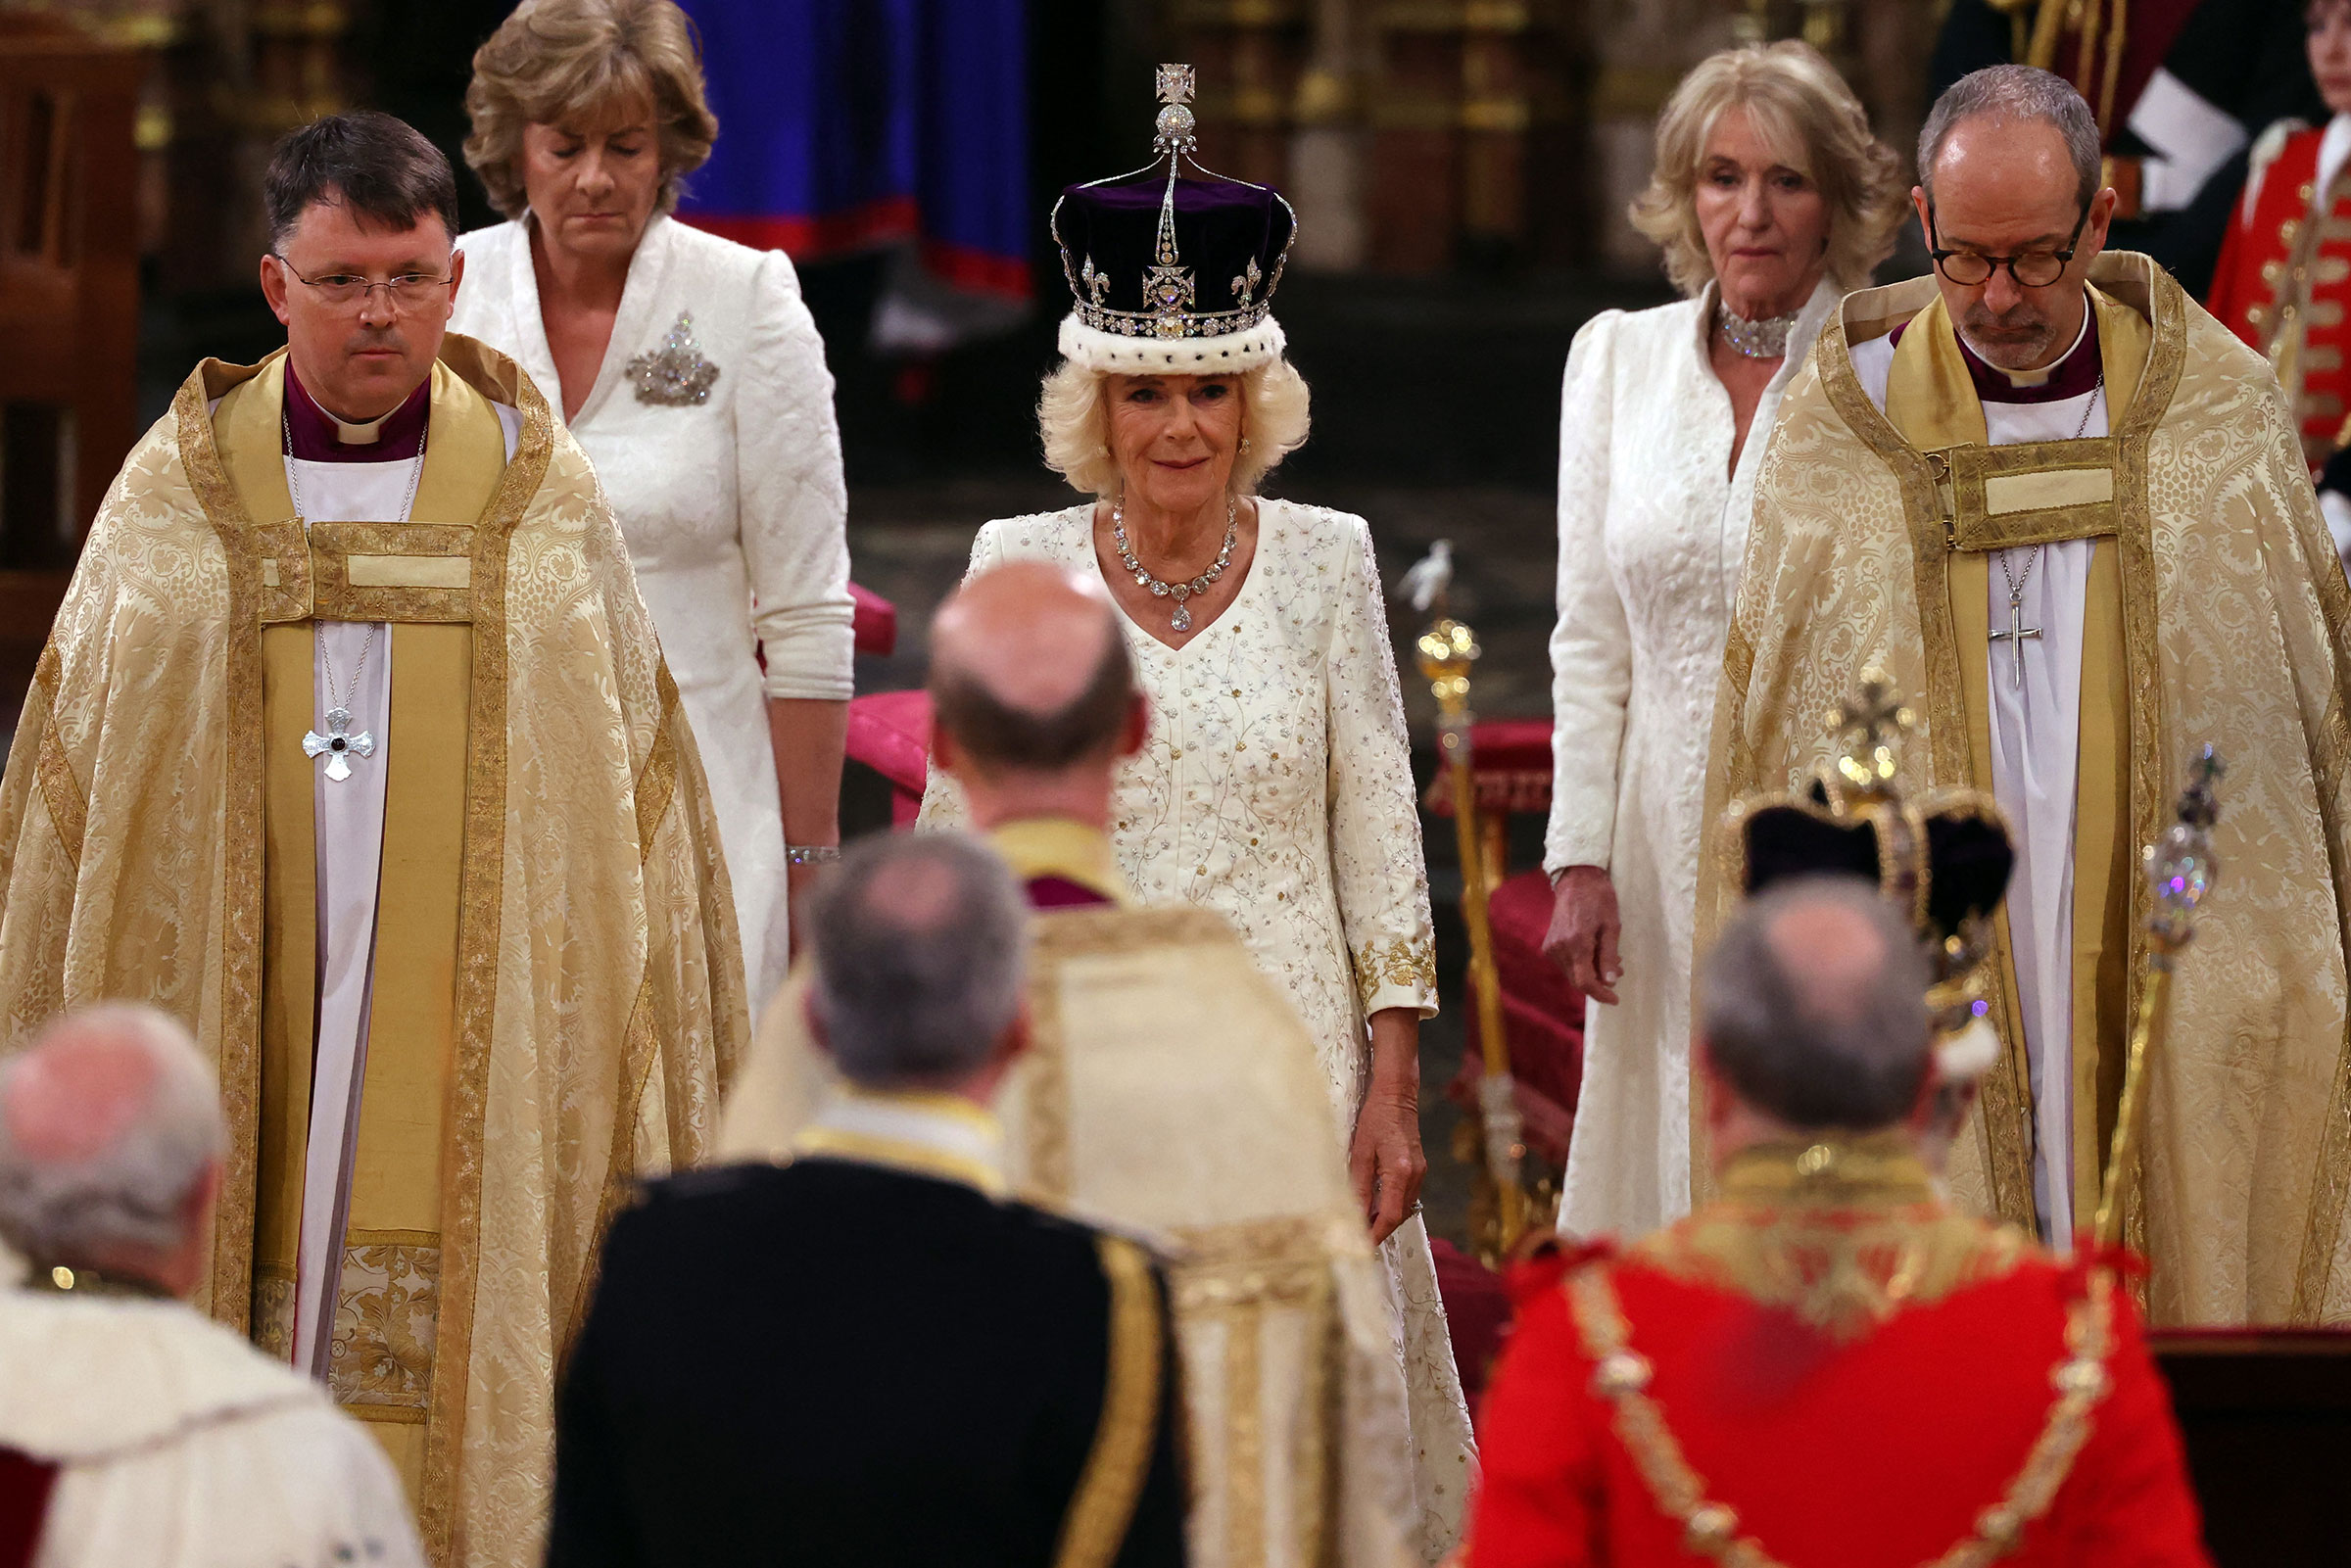 Britain's Camilla walks wearing a modified version of Queen Mary's Crown during the Coronation Ceremony inside Westminster Abbey. (Richard Pohle—Pool/AFP/Getty Images)